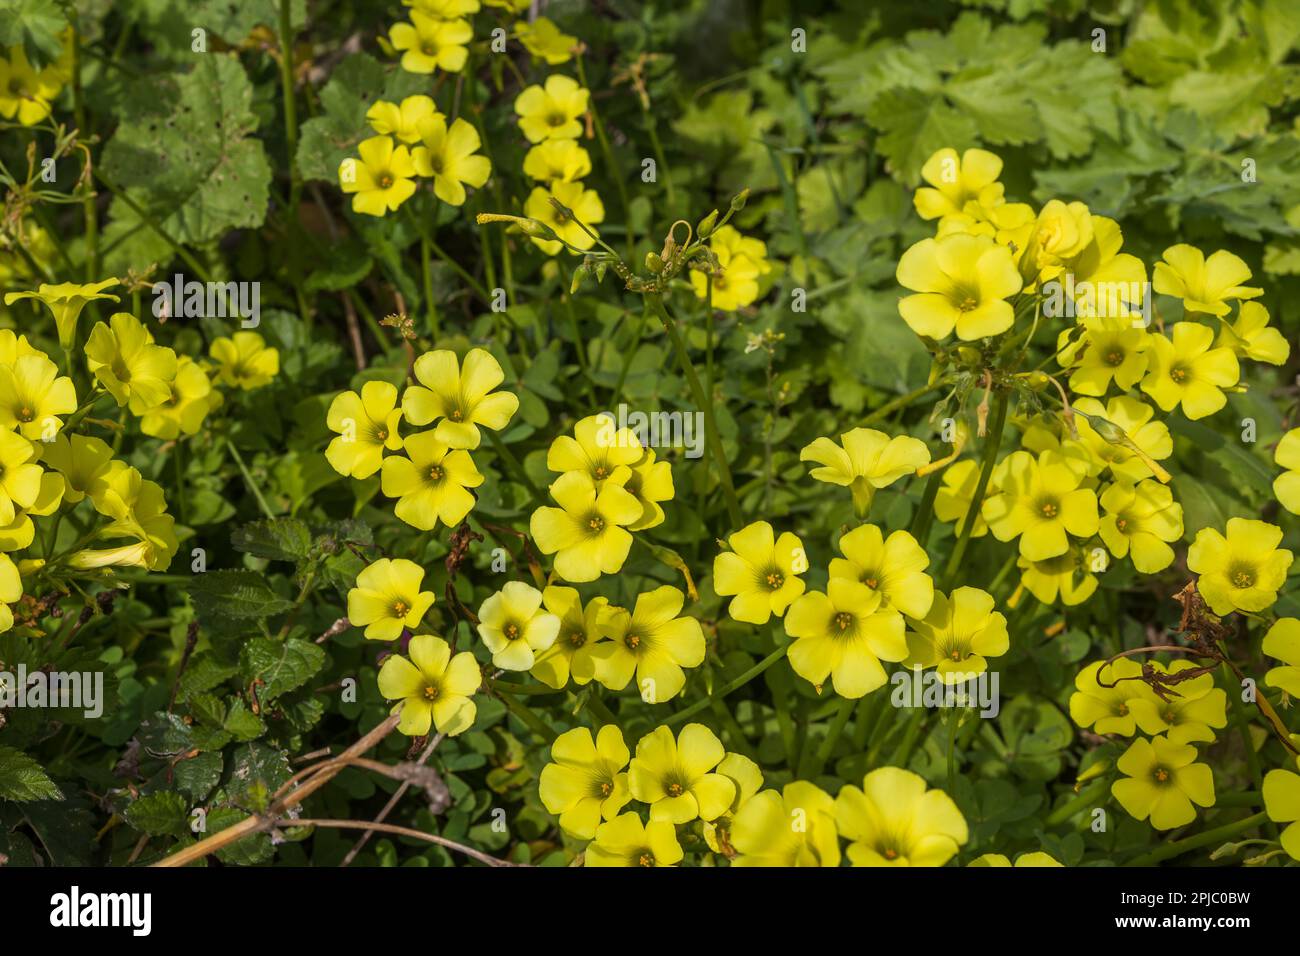 Flora of Israel. Oxalis pes-caprae is a species of tristylous yellow-flowering plant in the wood sorrel family Oxalidaceae. Oxalis cernua is a less co Stock Photo